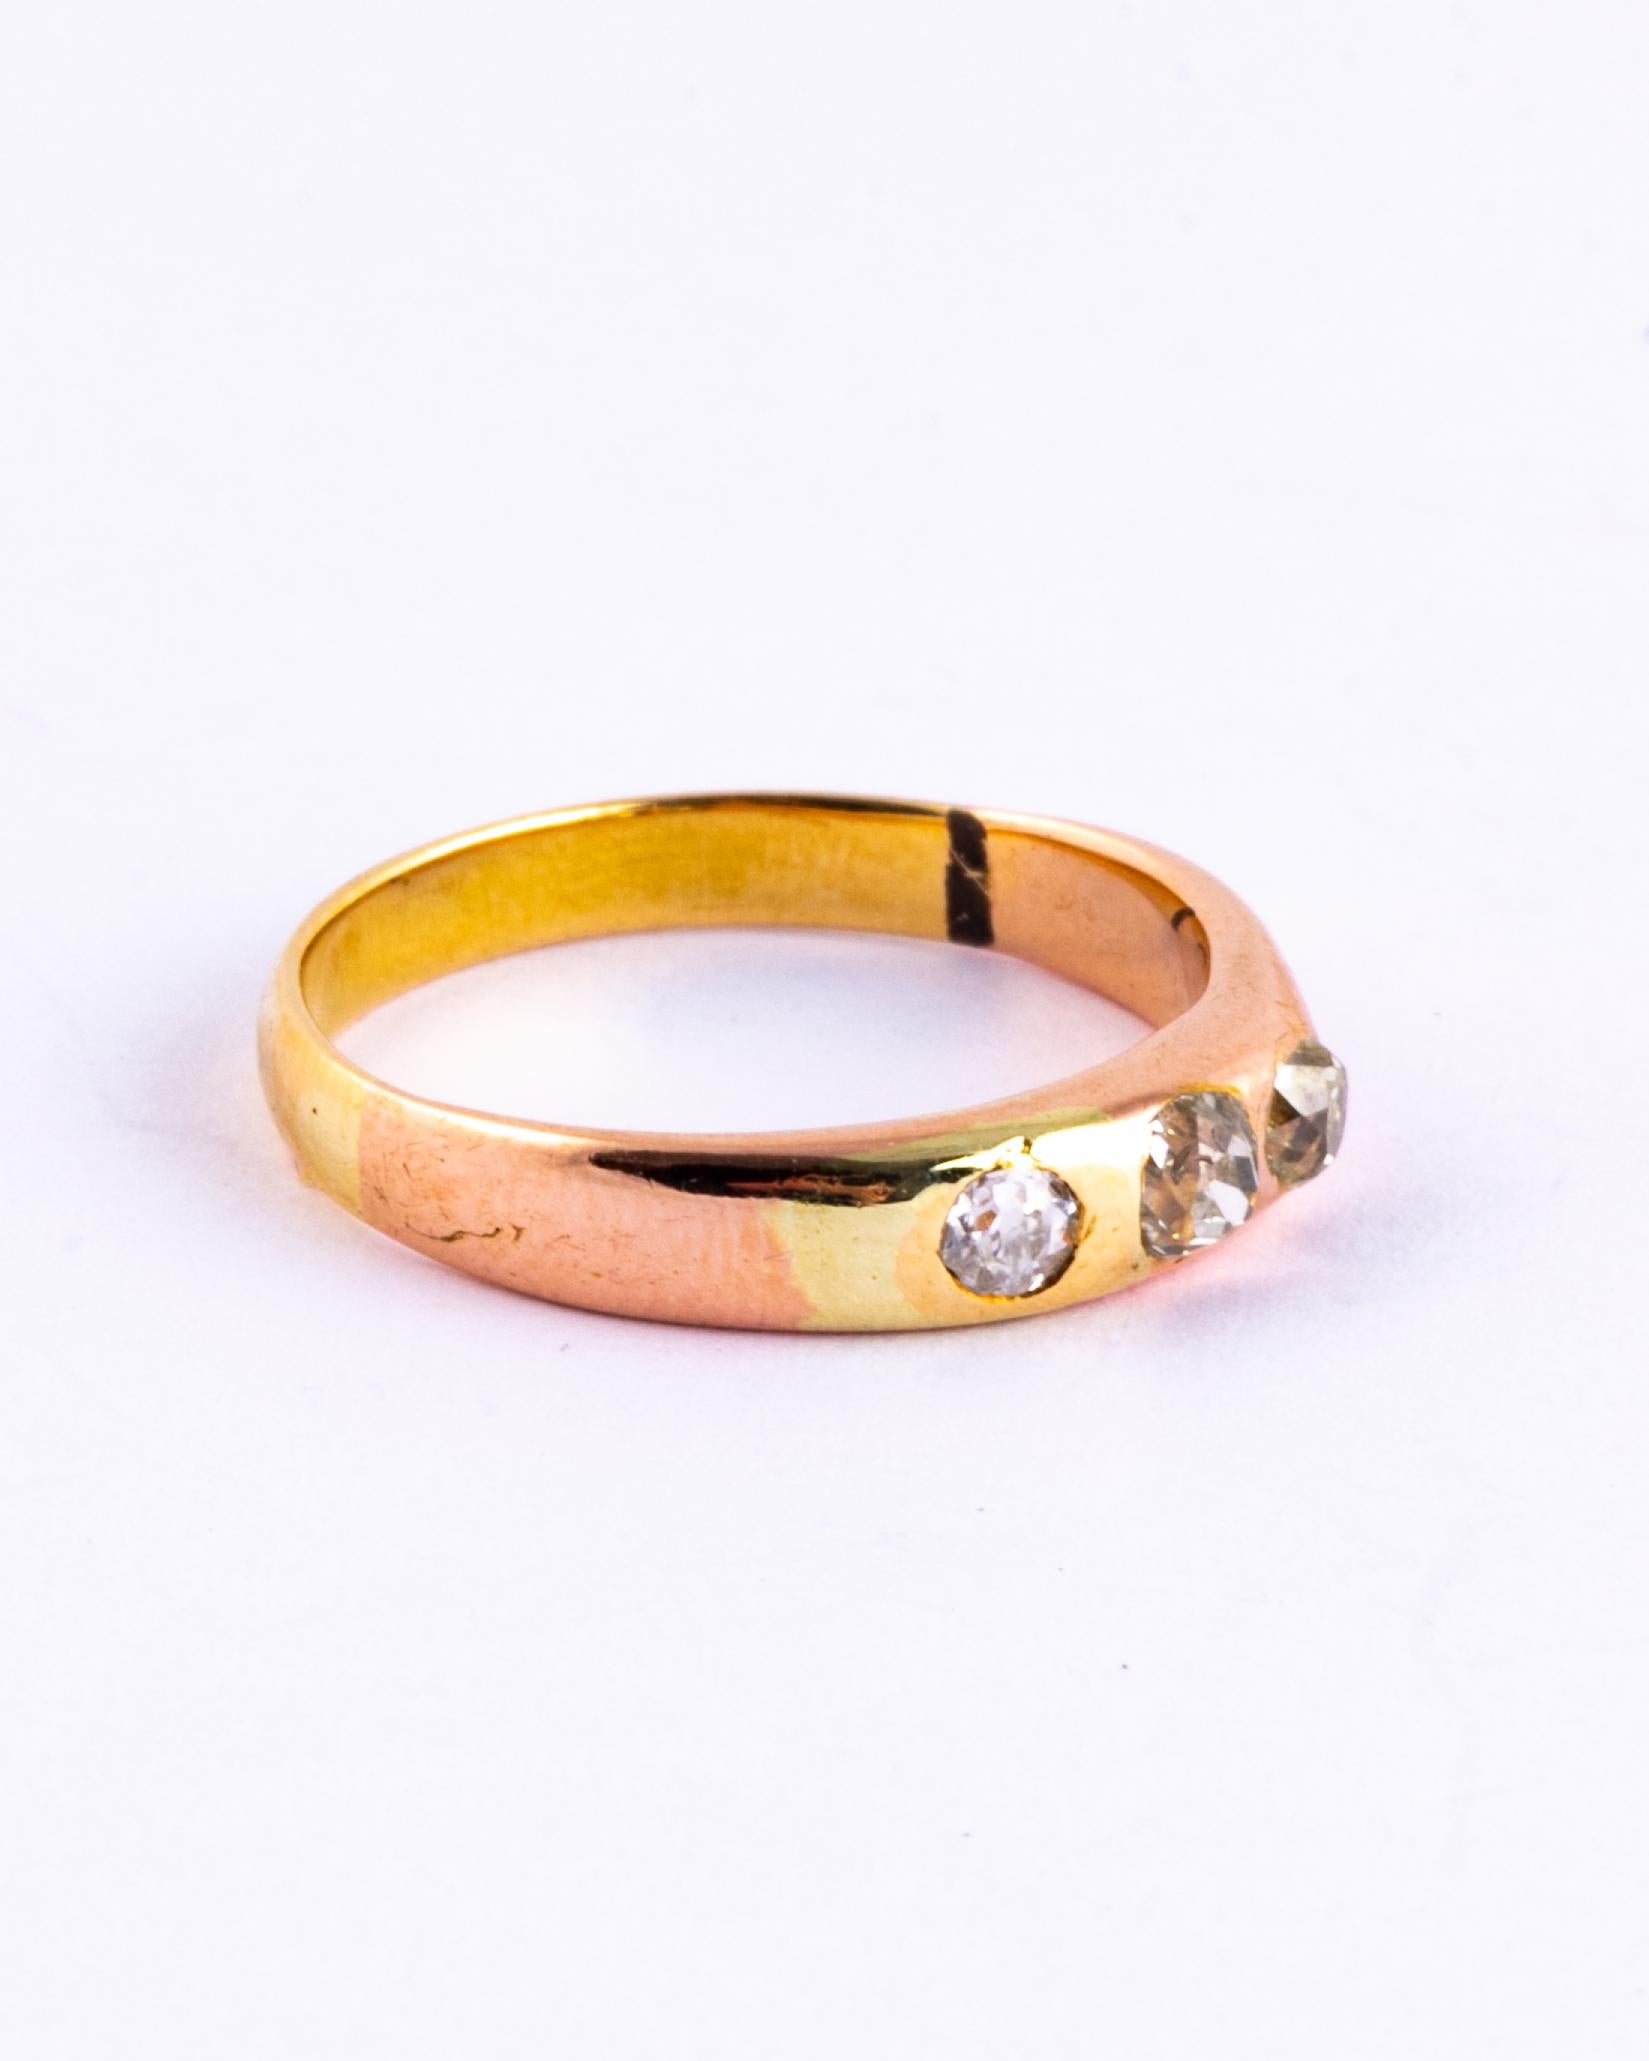 Sitting at the centre of this simple gold band are three diamonds totalling 35pts. The diamonds are old mine cut and have a wonderful bright sparkle. 

Ring Size: L 1/2 or 6 
Band Width: 4mm

Weight: 2.9g